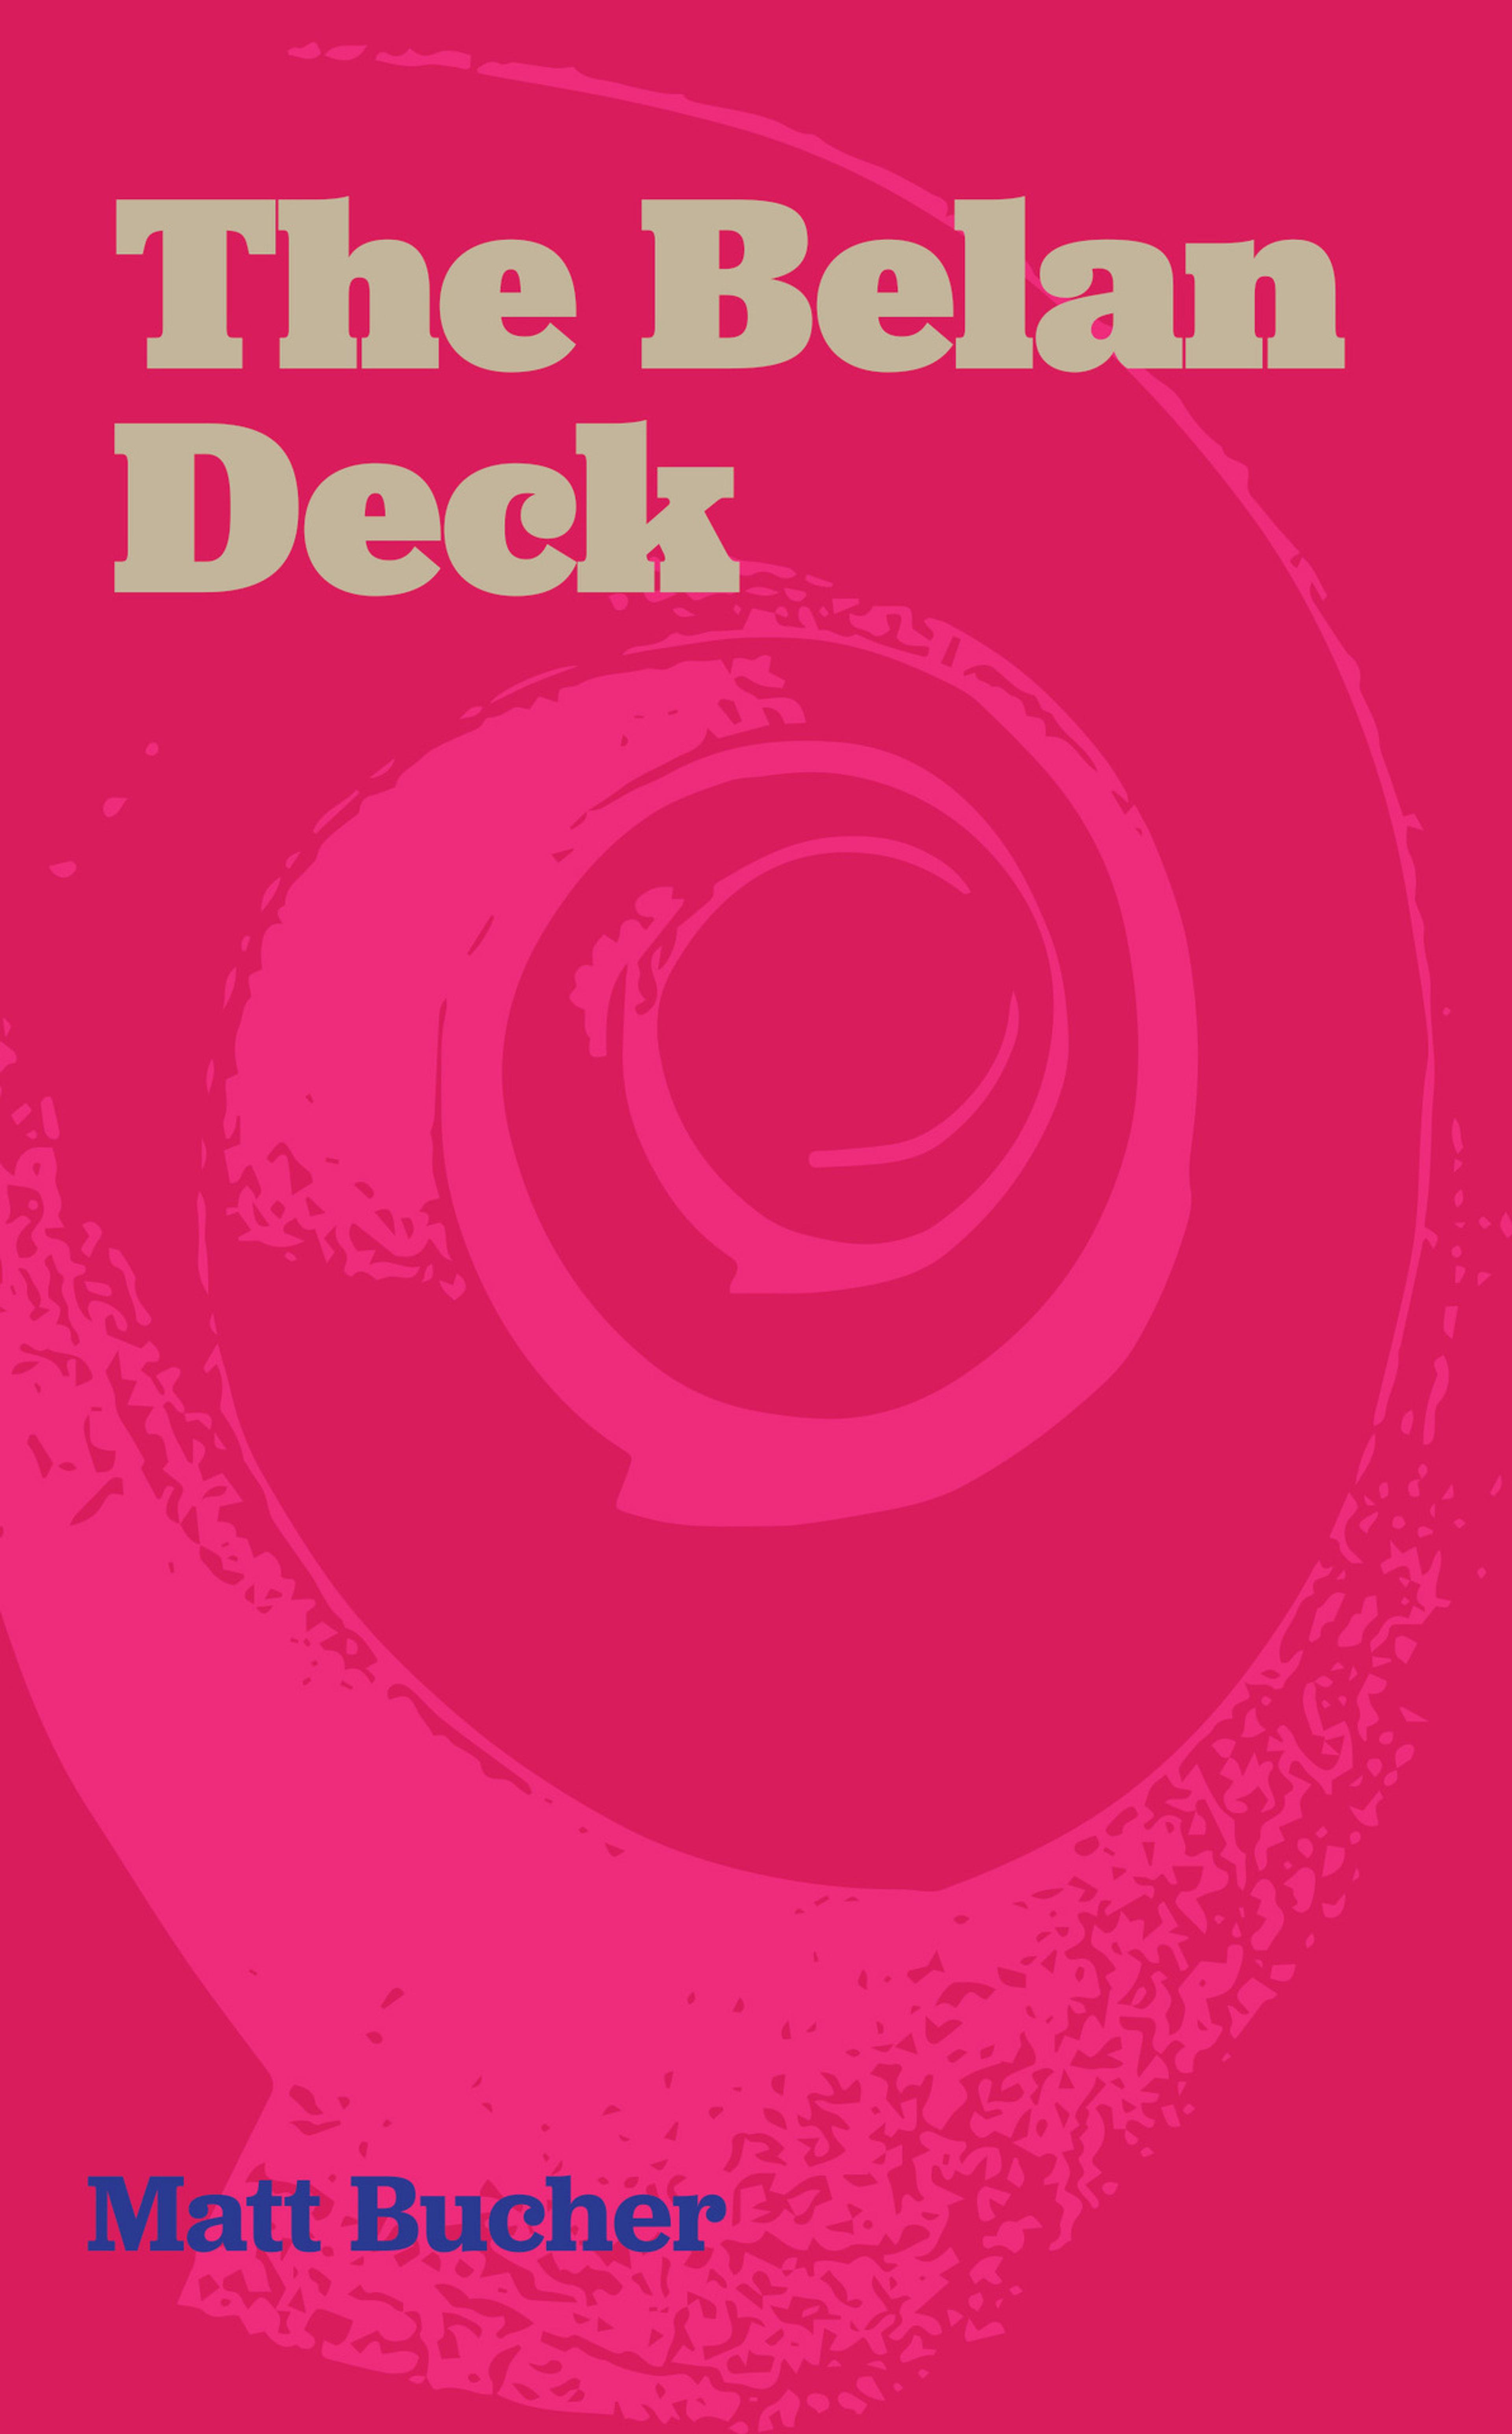 Cover of book titled The Belan Deck